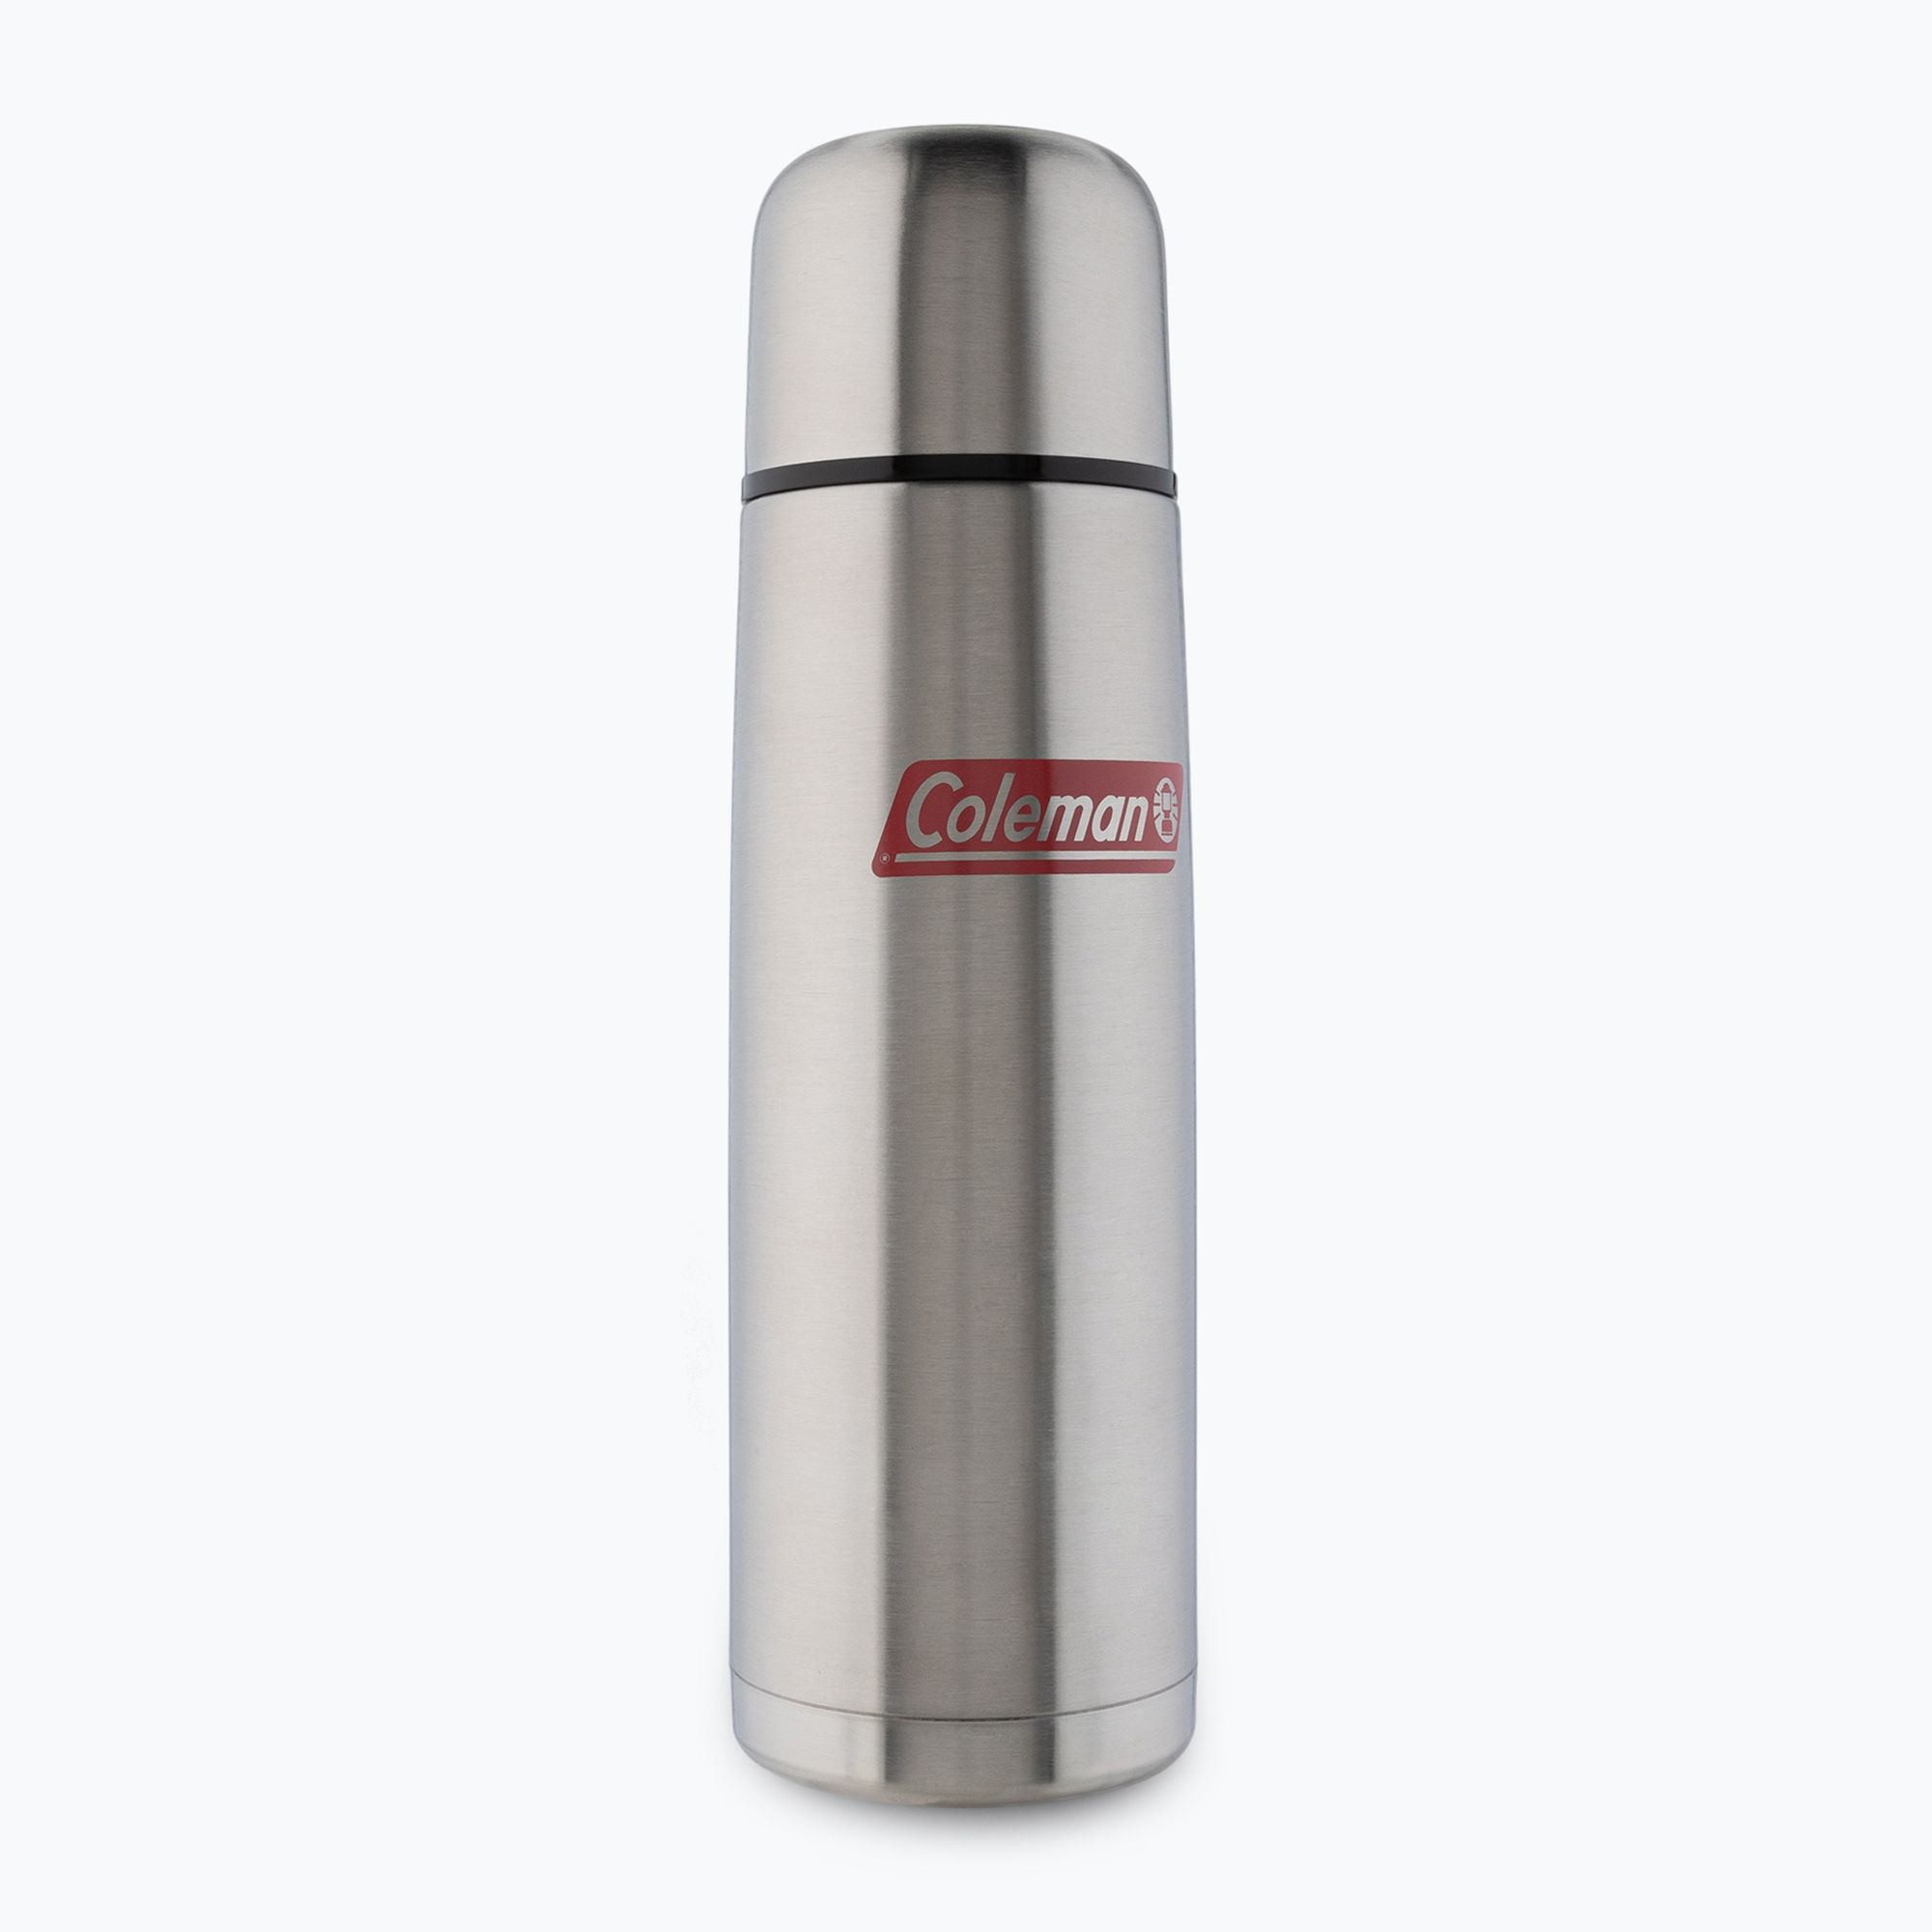 https://sportano.com/img/986c30c27a3d26a3ee16c136f92f4ff5/3/1/3138522045081_20-jpg/coleman-thermos-silver-204508-0.jpg